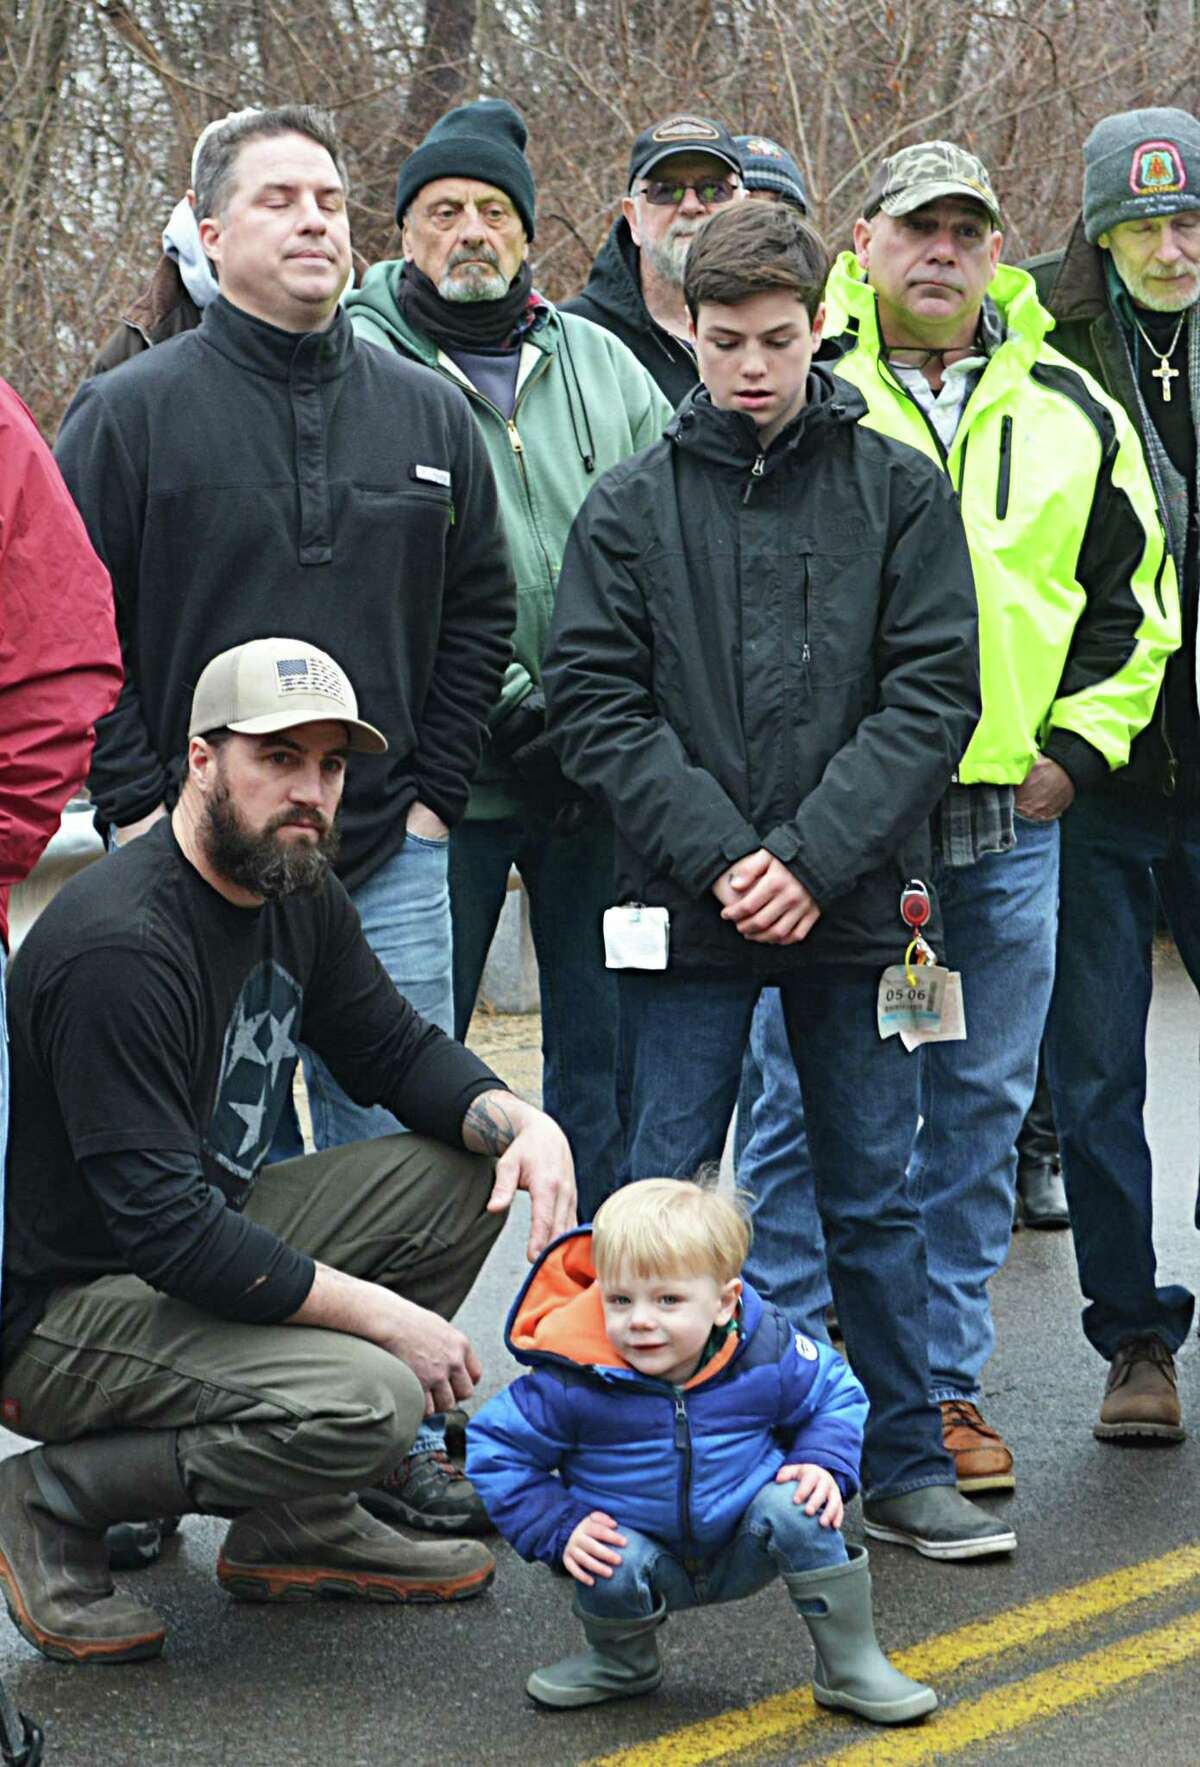 Union workers, officials, and families and friends of the Kleen Energy blast victims gathered Thursday morning at the memorial on River Road in Middletown to remember the six men who died Feb. 7, 2010, in the tragic gas explosion.